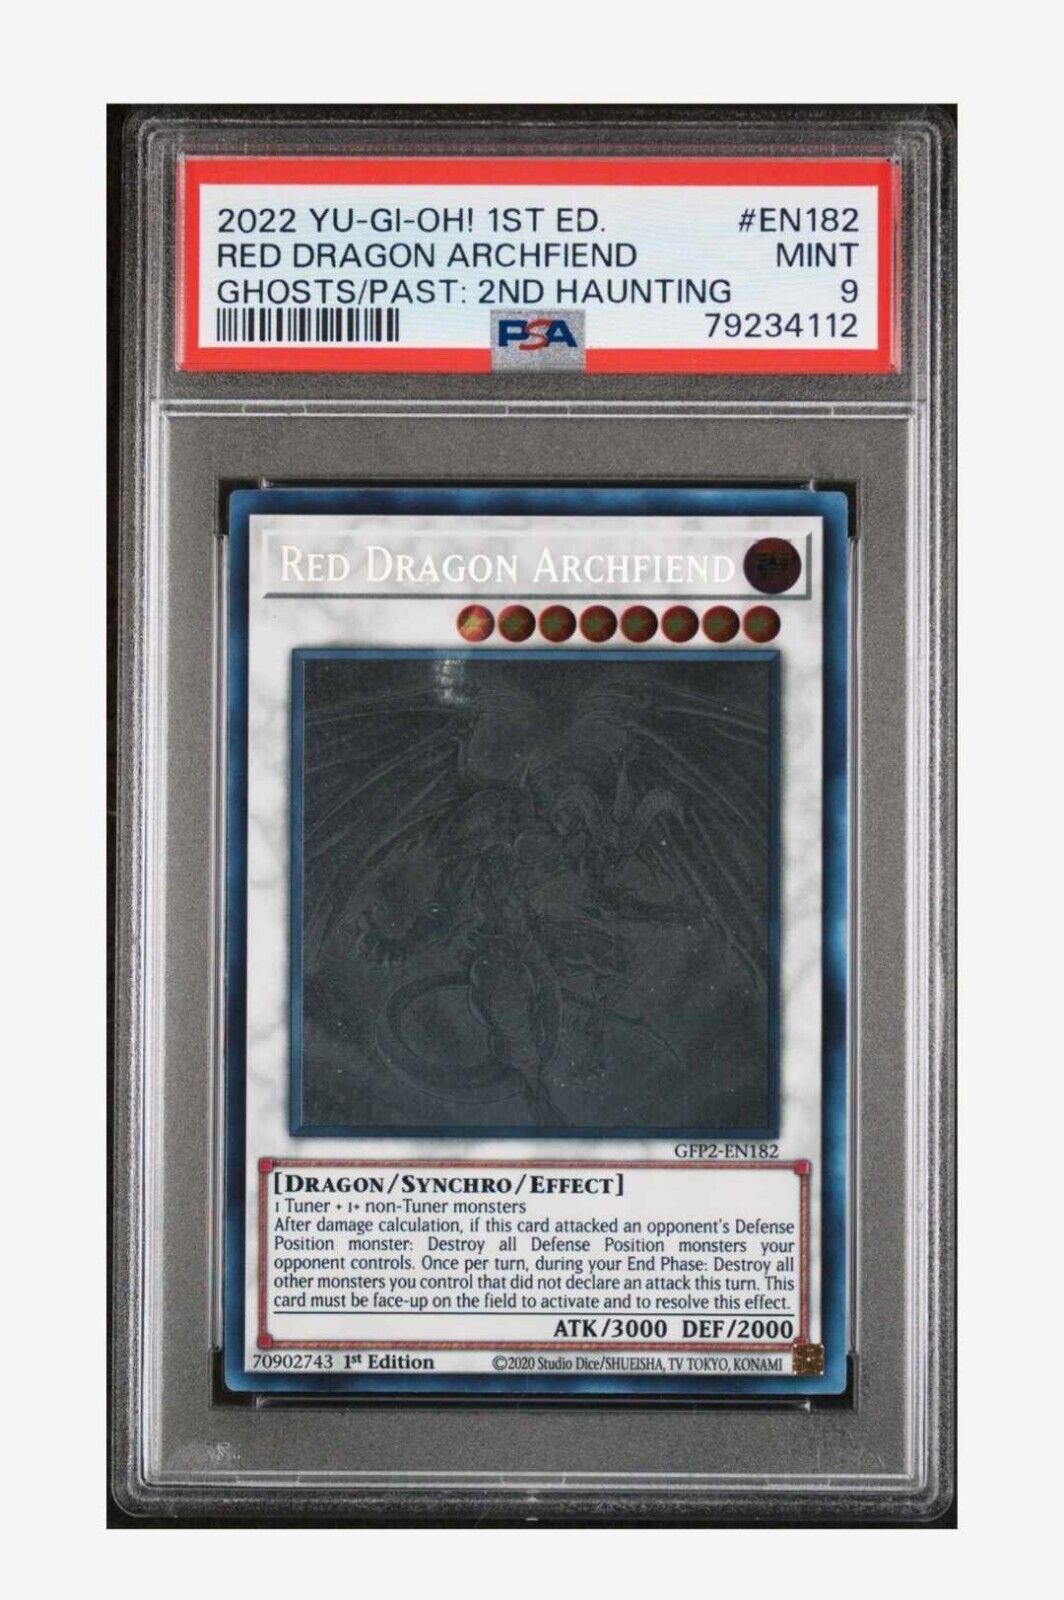 2022 Yu-Gi-Oh 1st Edition Ghosts/Past: 2nd Haunting Red Dragon Archfiend PSA 9